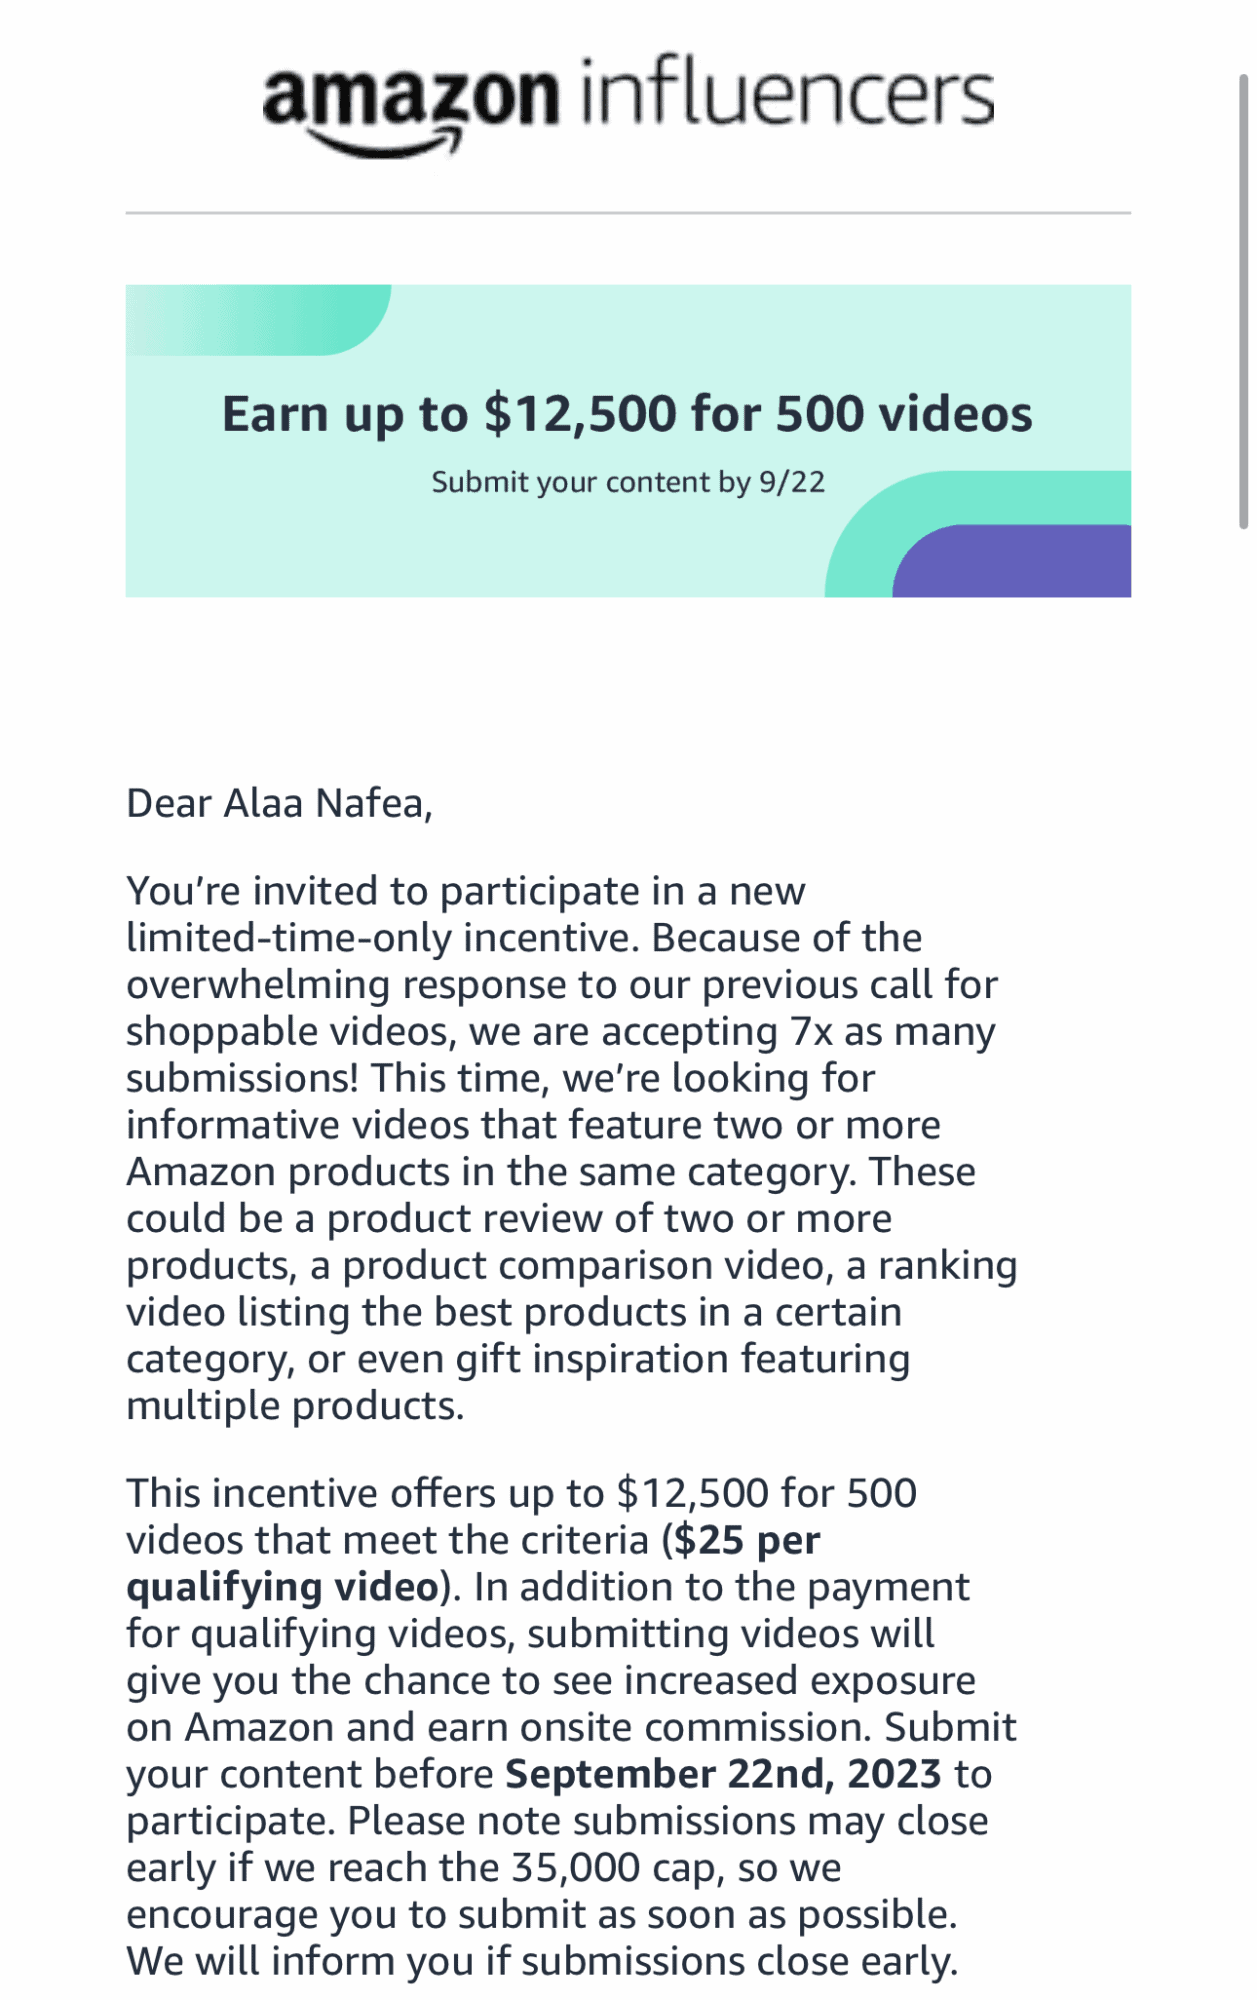 Amazon offers influencers $12,500 USD for video content